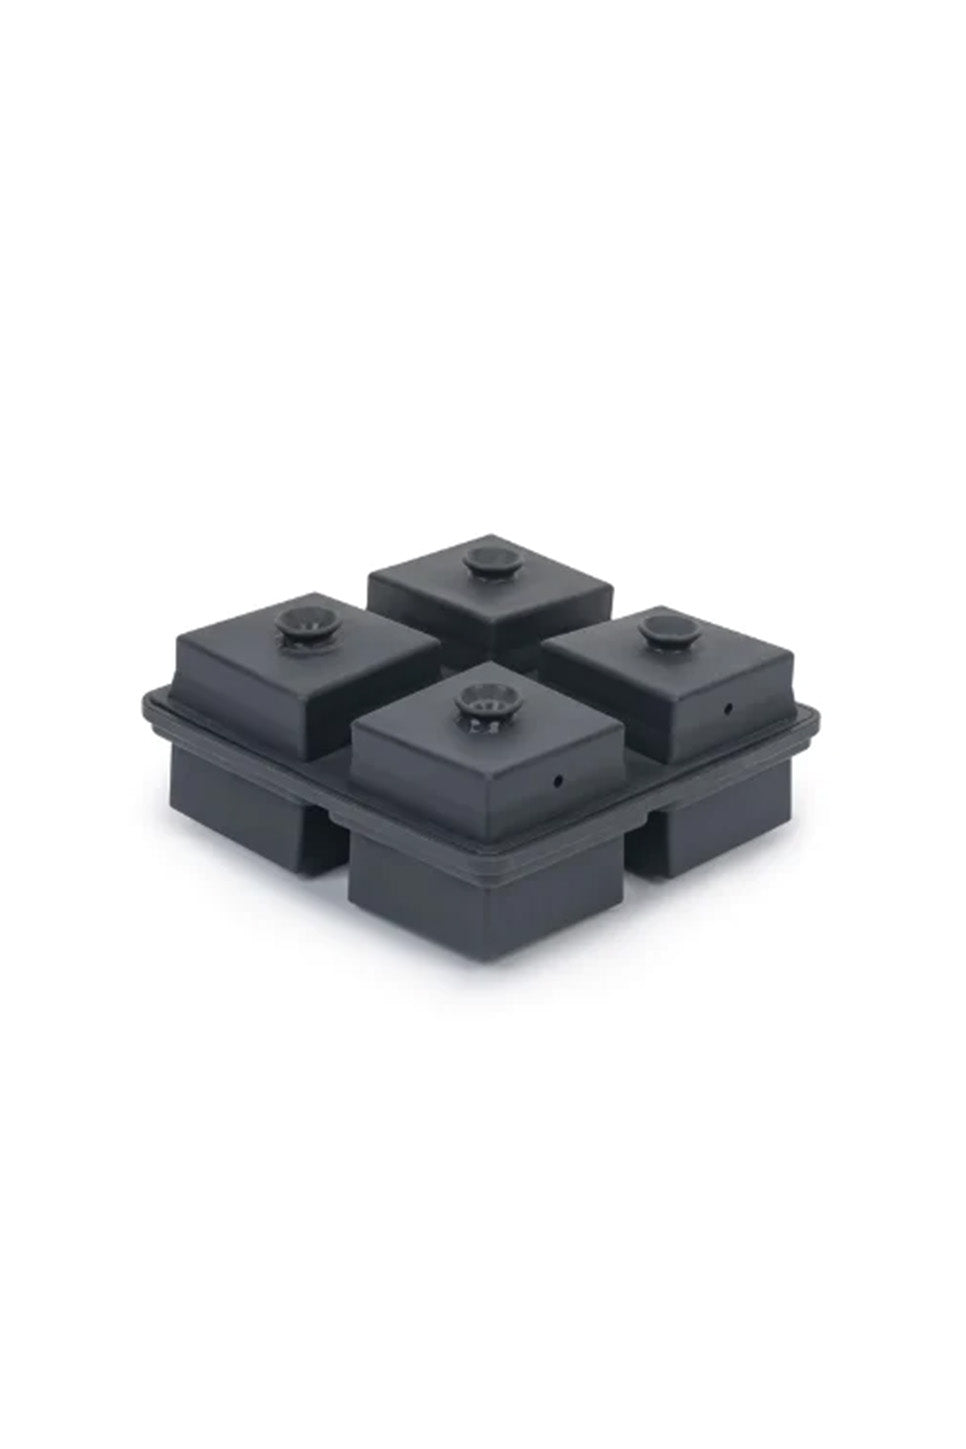 W&P - Crystal Cocktail Ice Tray - Charcoal